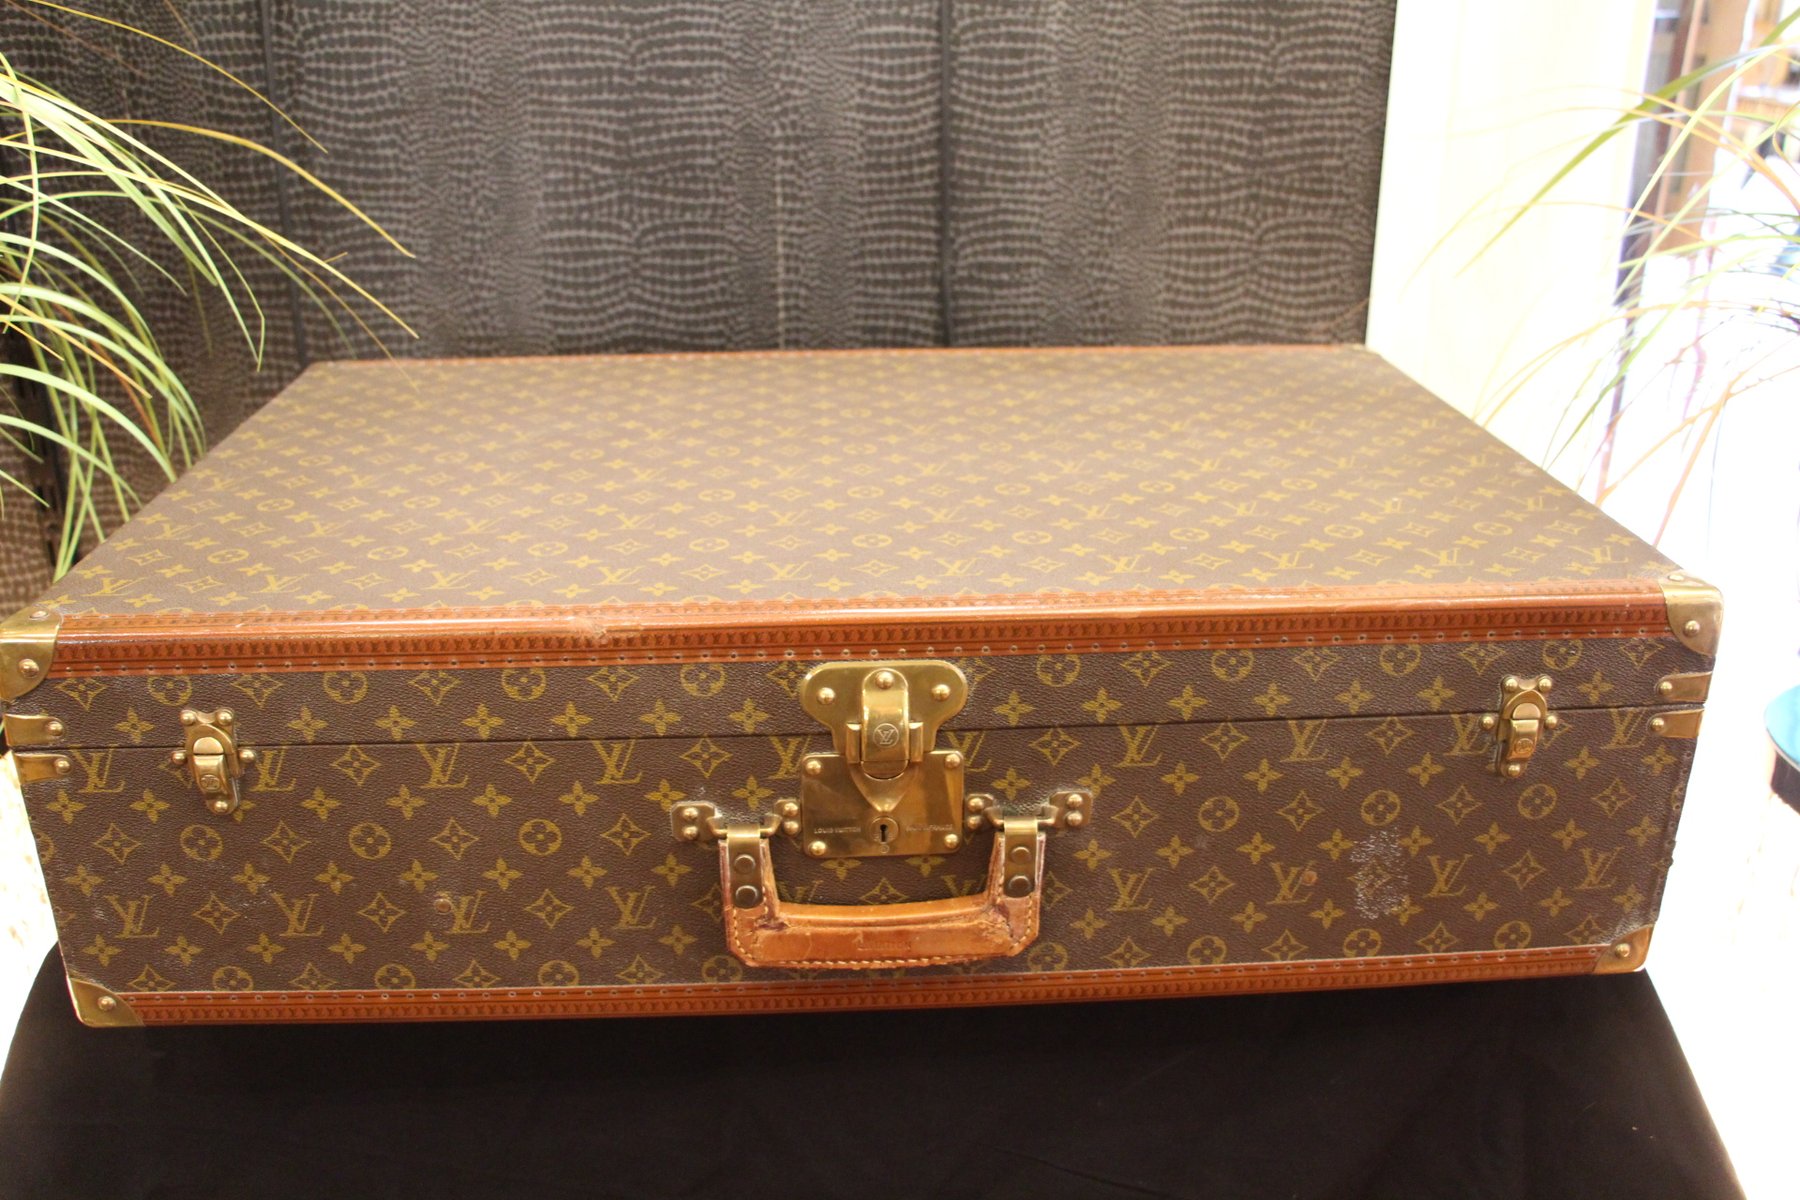 Square Handle Suitcase from Louis Vuitton, 1970s for sale at Pamono